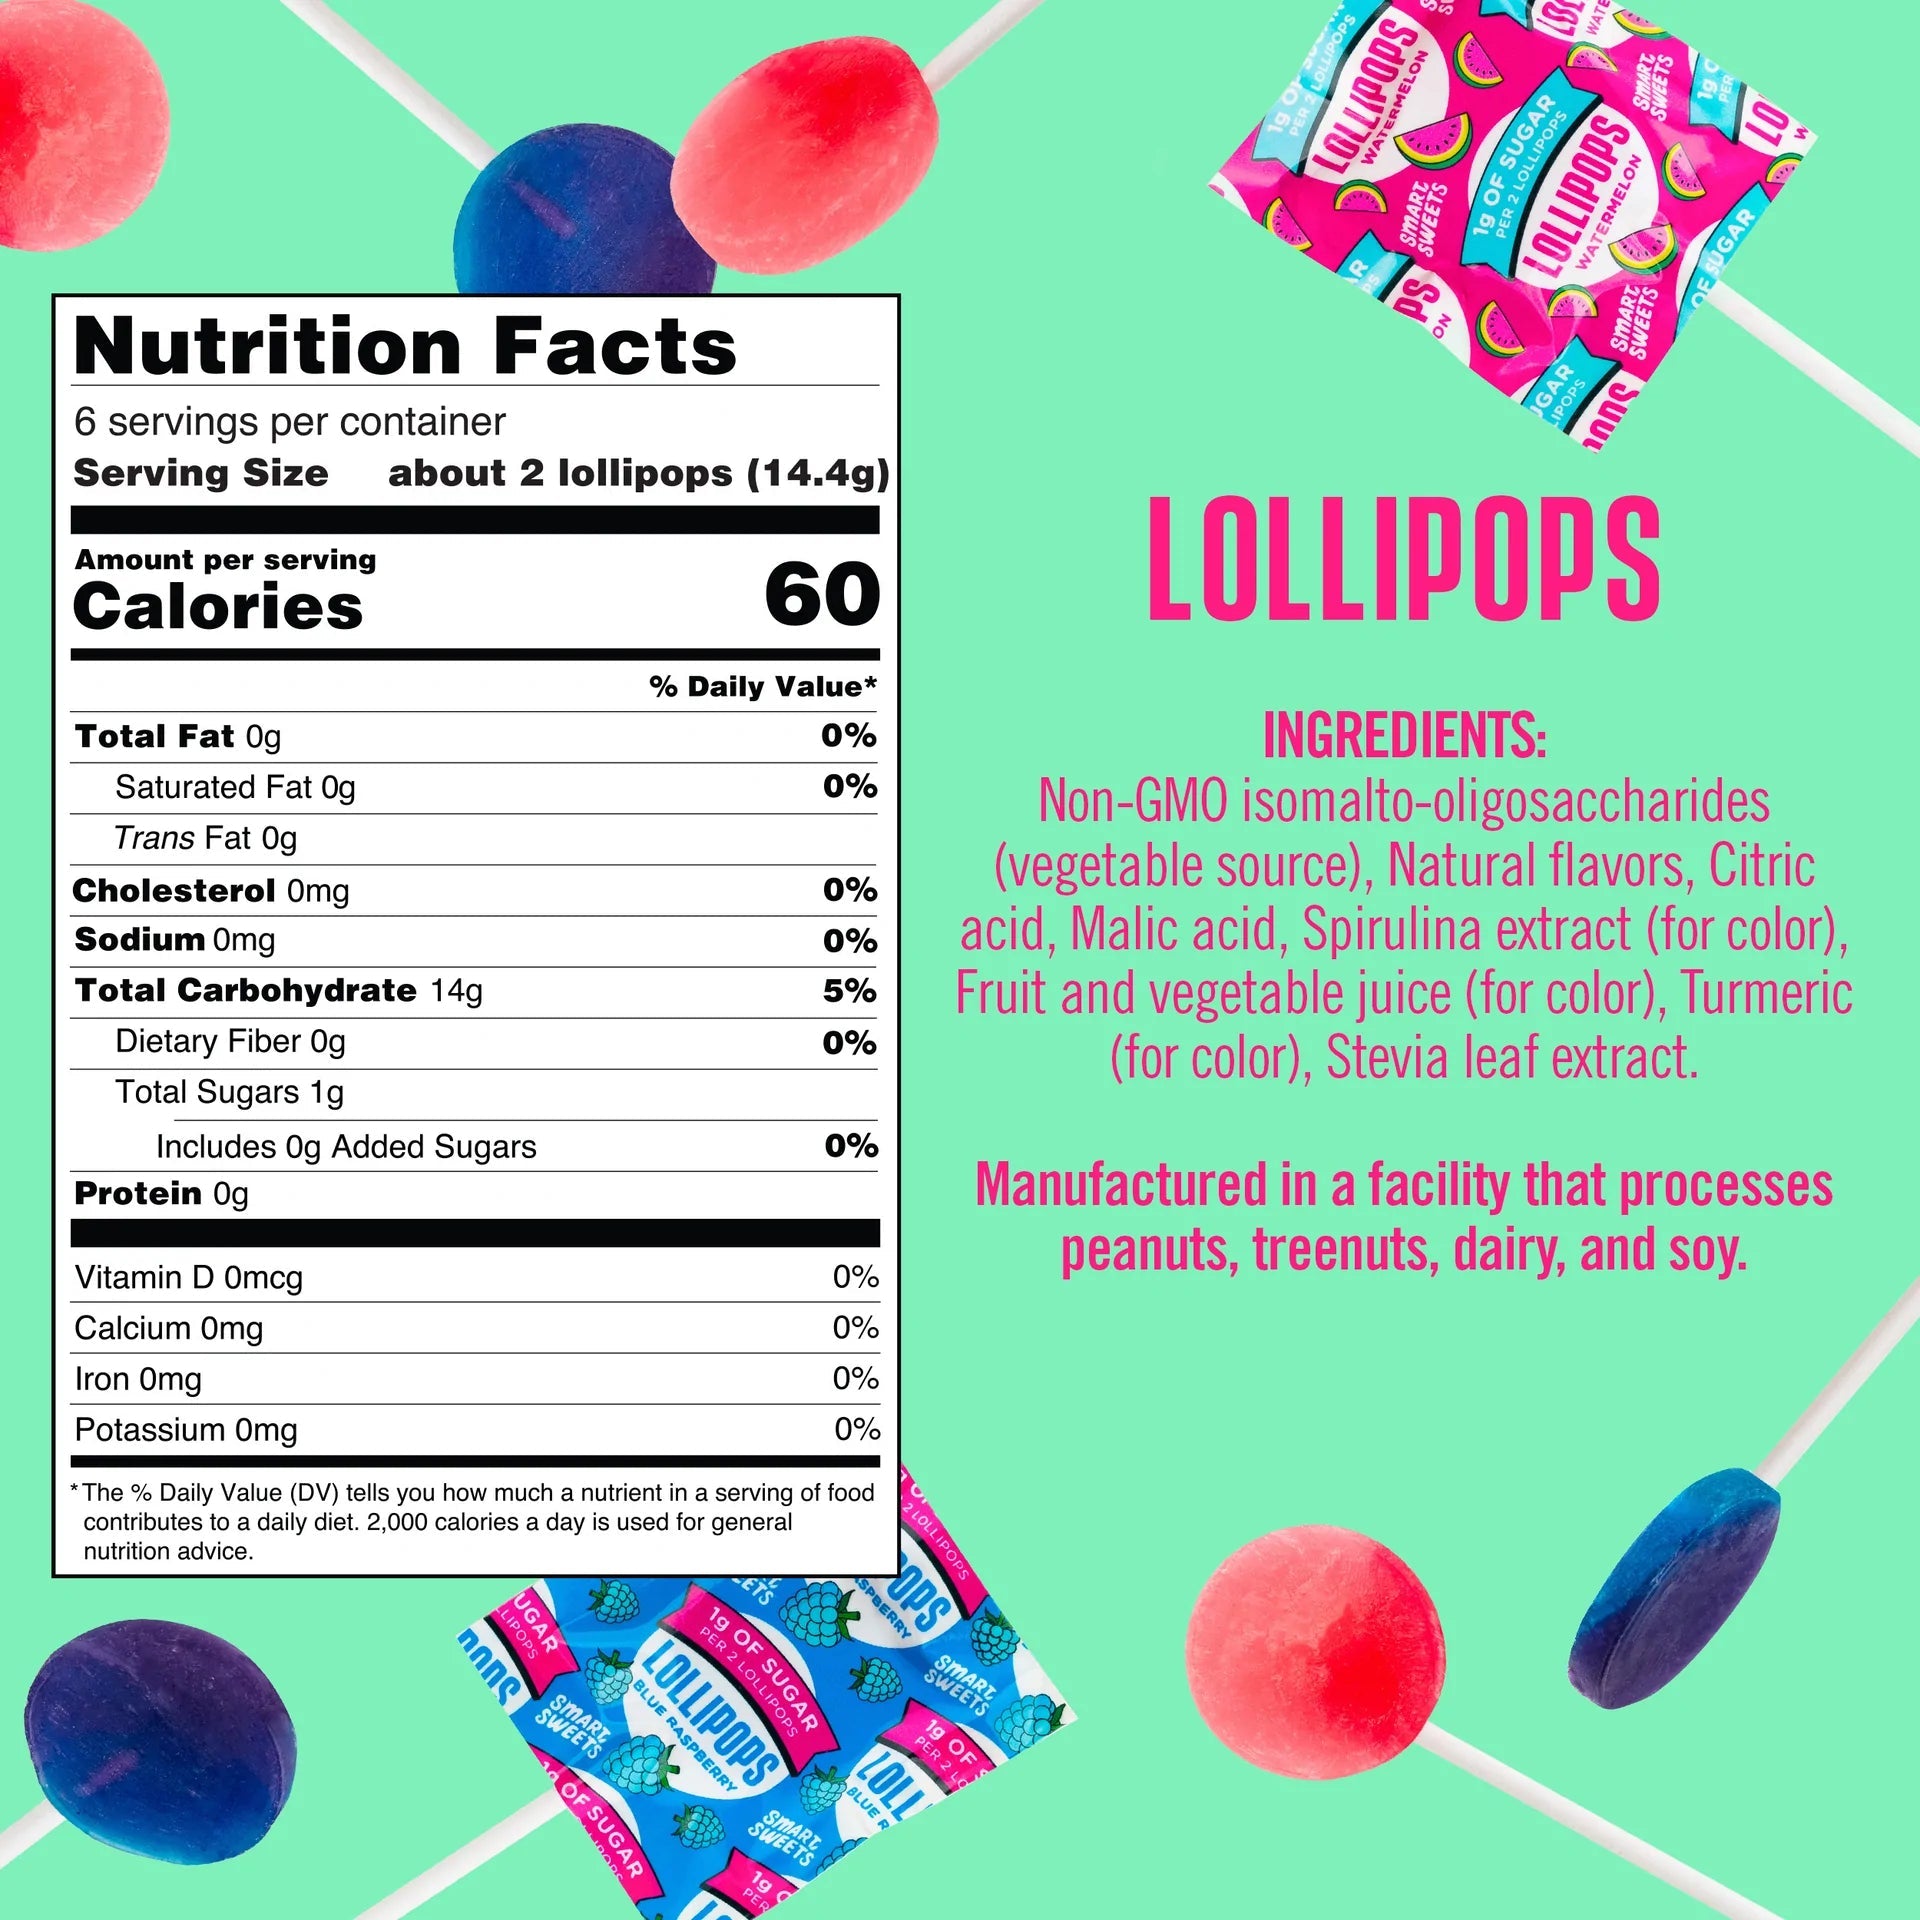 Smart Sweets Lollipops 86g (3 oz) - High-quality Fiber by Smart Sweets at 